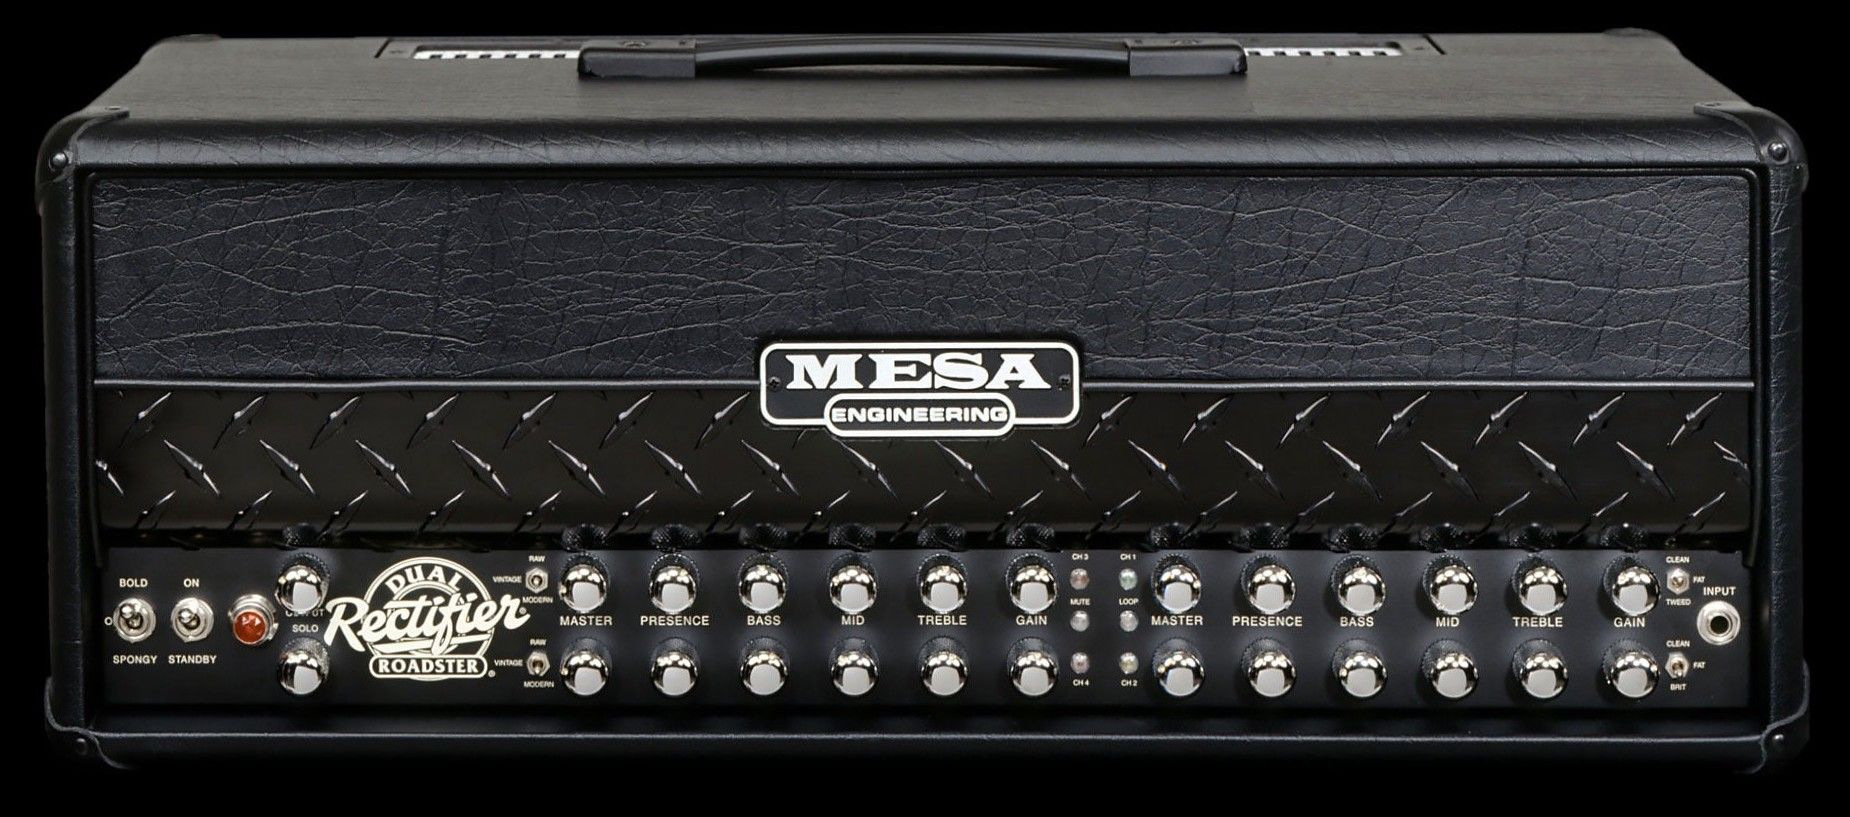 The mighty Mesa Dual Rectifier Roadster — the amp that’s haunted me since a young age.